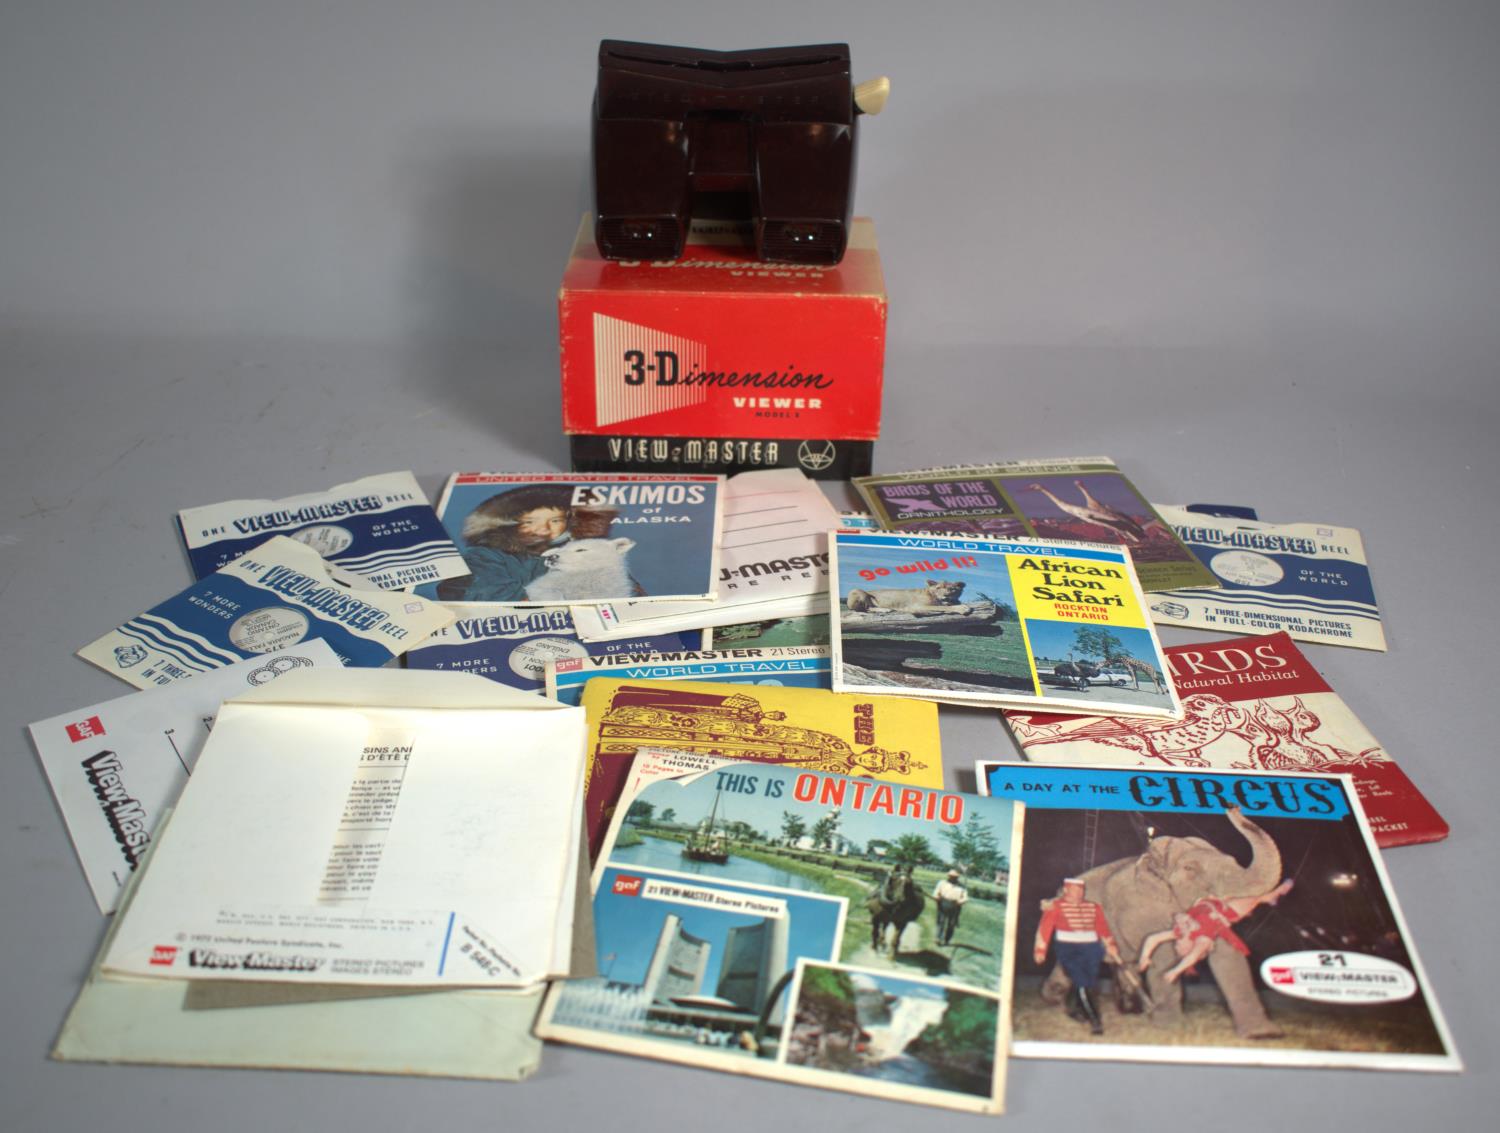 A Viewmaster Viewer Together with a Collection of Stereo Picture Reels